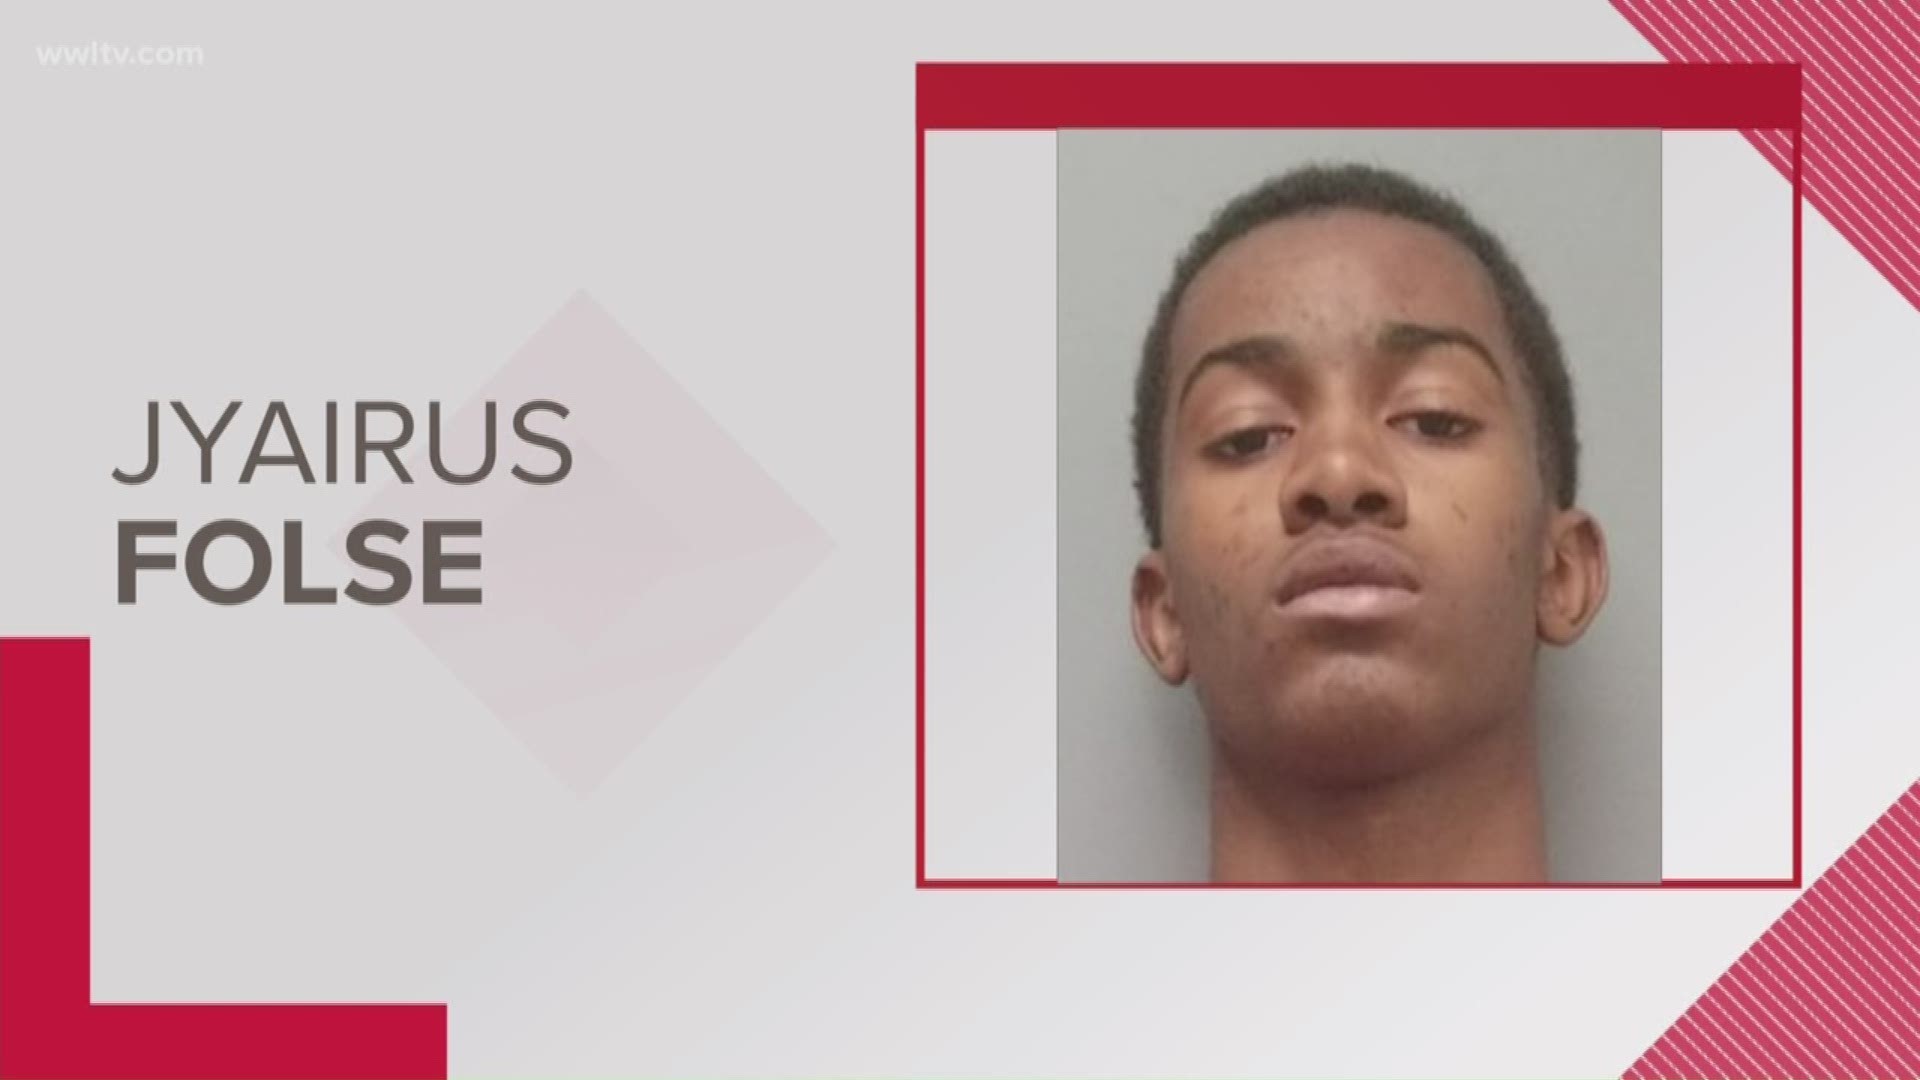 Police identified the suspect as Jyairus Folse, 17, of Lockport.